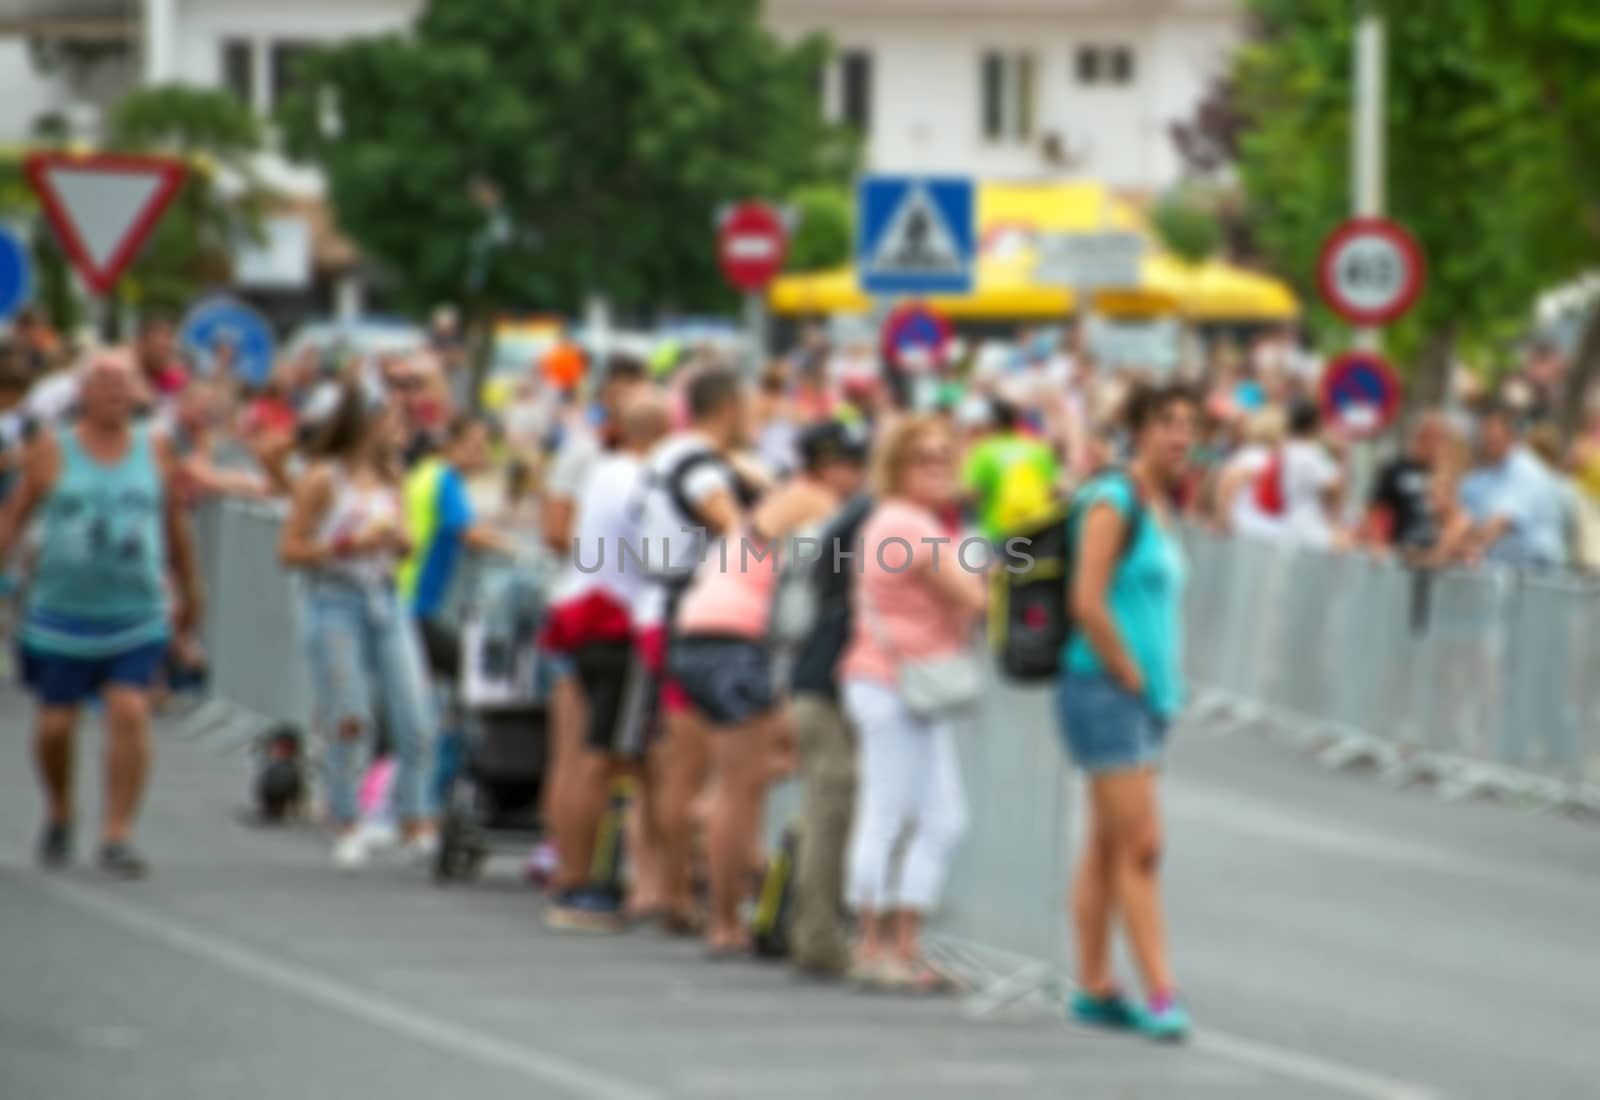 People during the competition. Blurred image. by dmitrimaruta